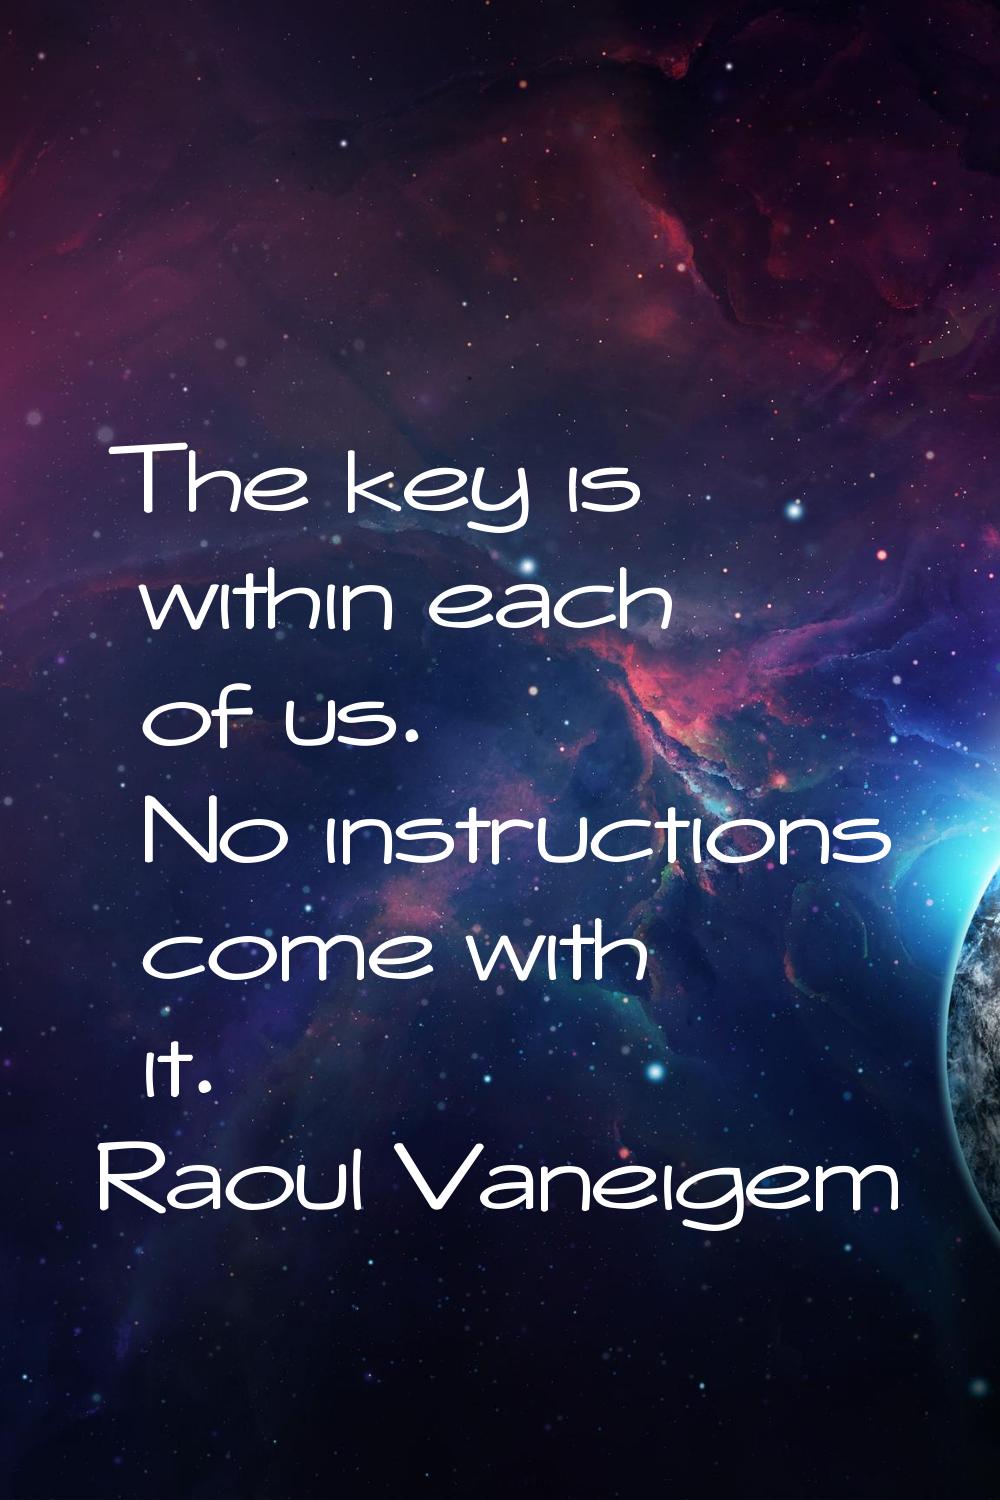 The key is within each of us. No instructions come with it.